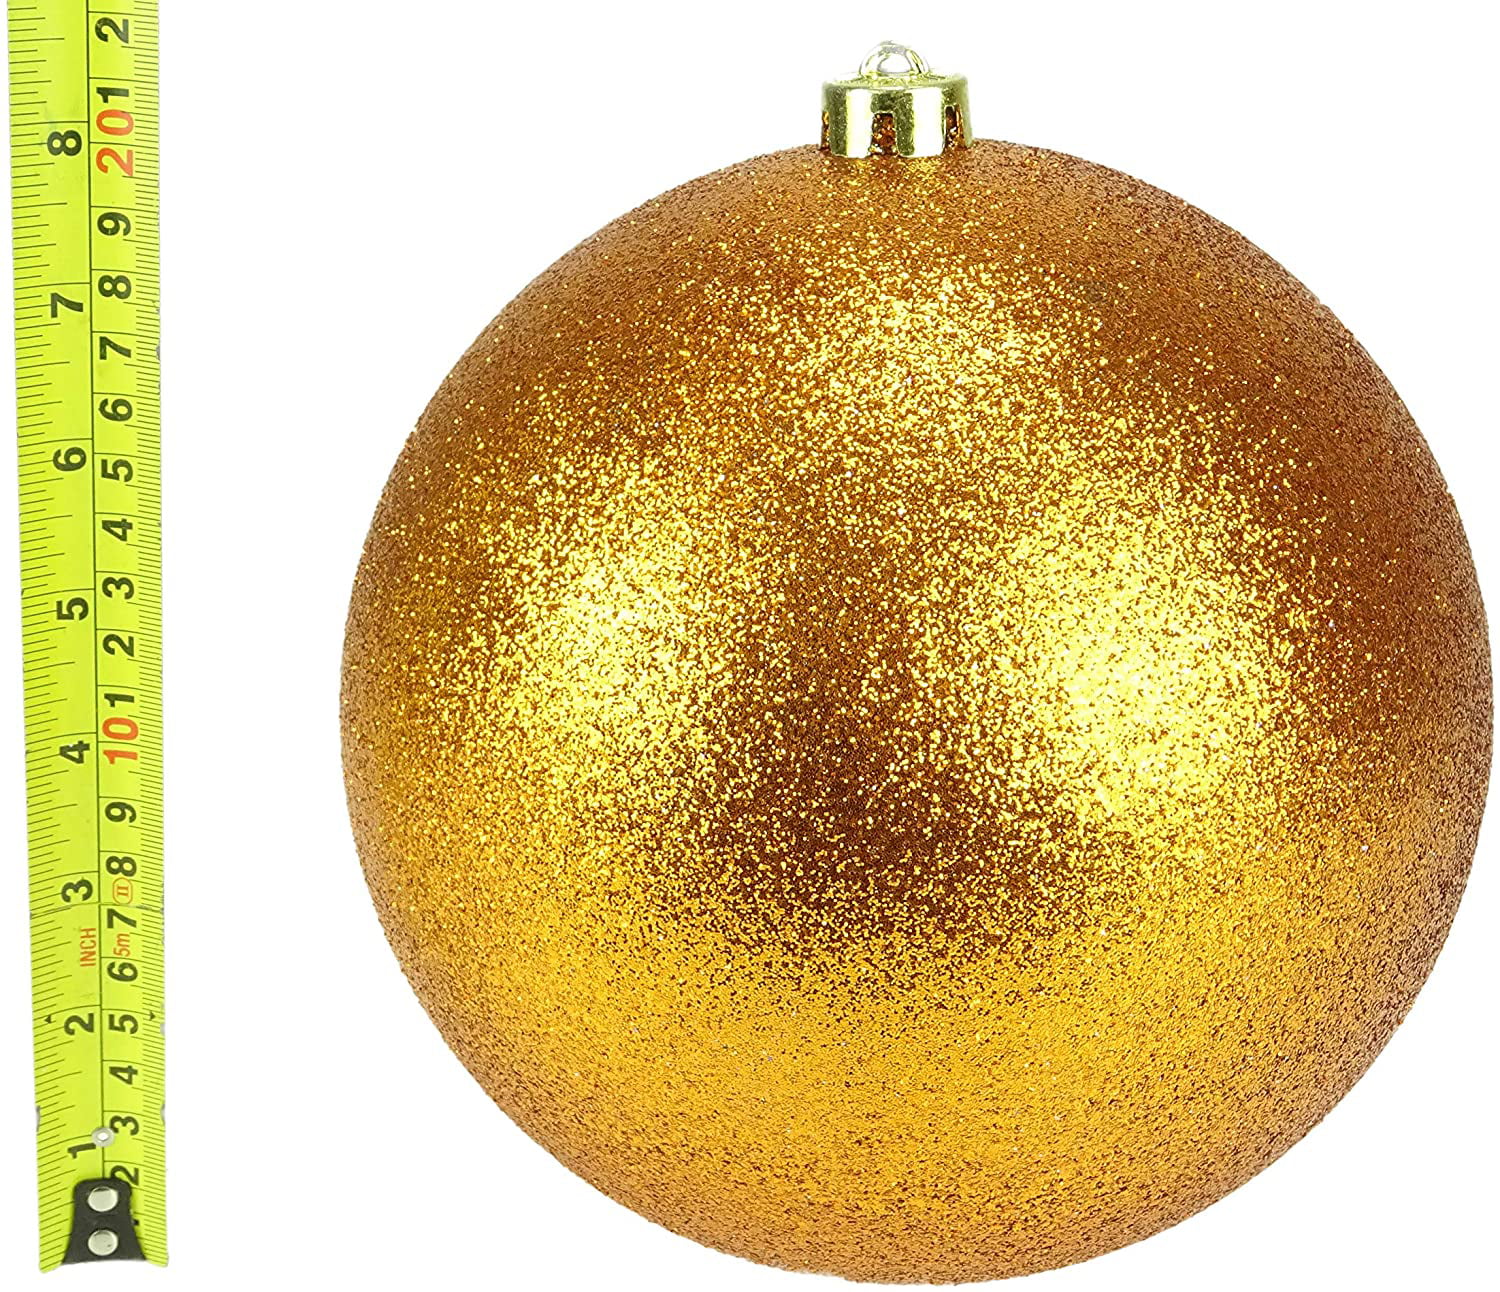 Purple Shiny & Glitter Design-Christmas Baubles BA125 Pack Of 2-200mm Baubles 